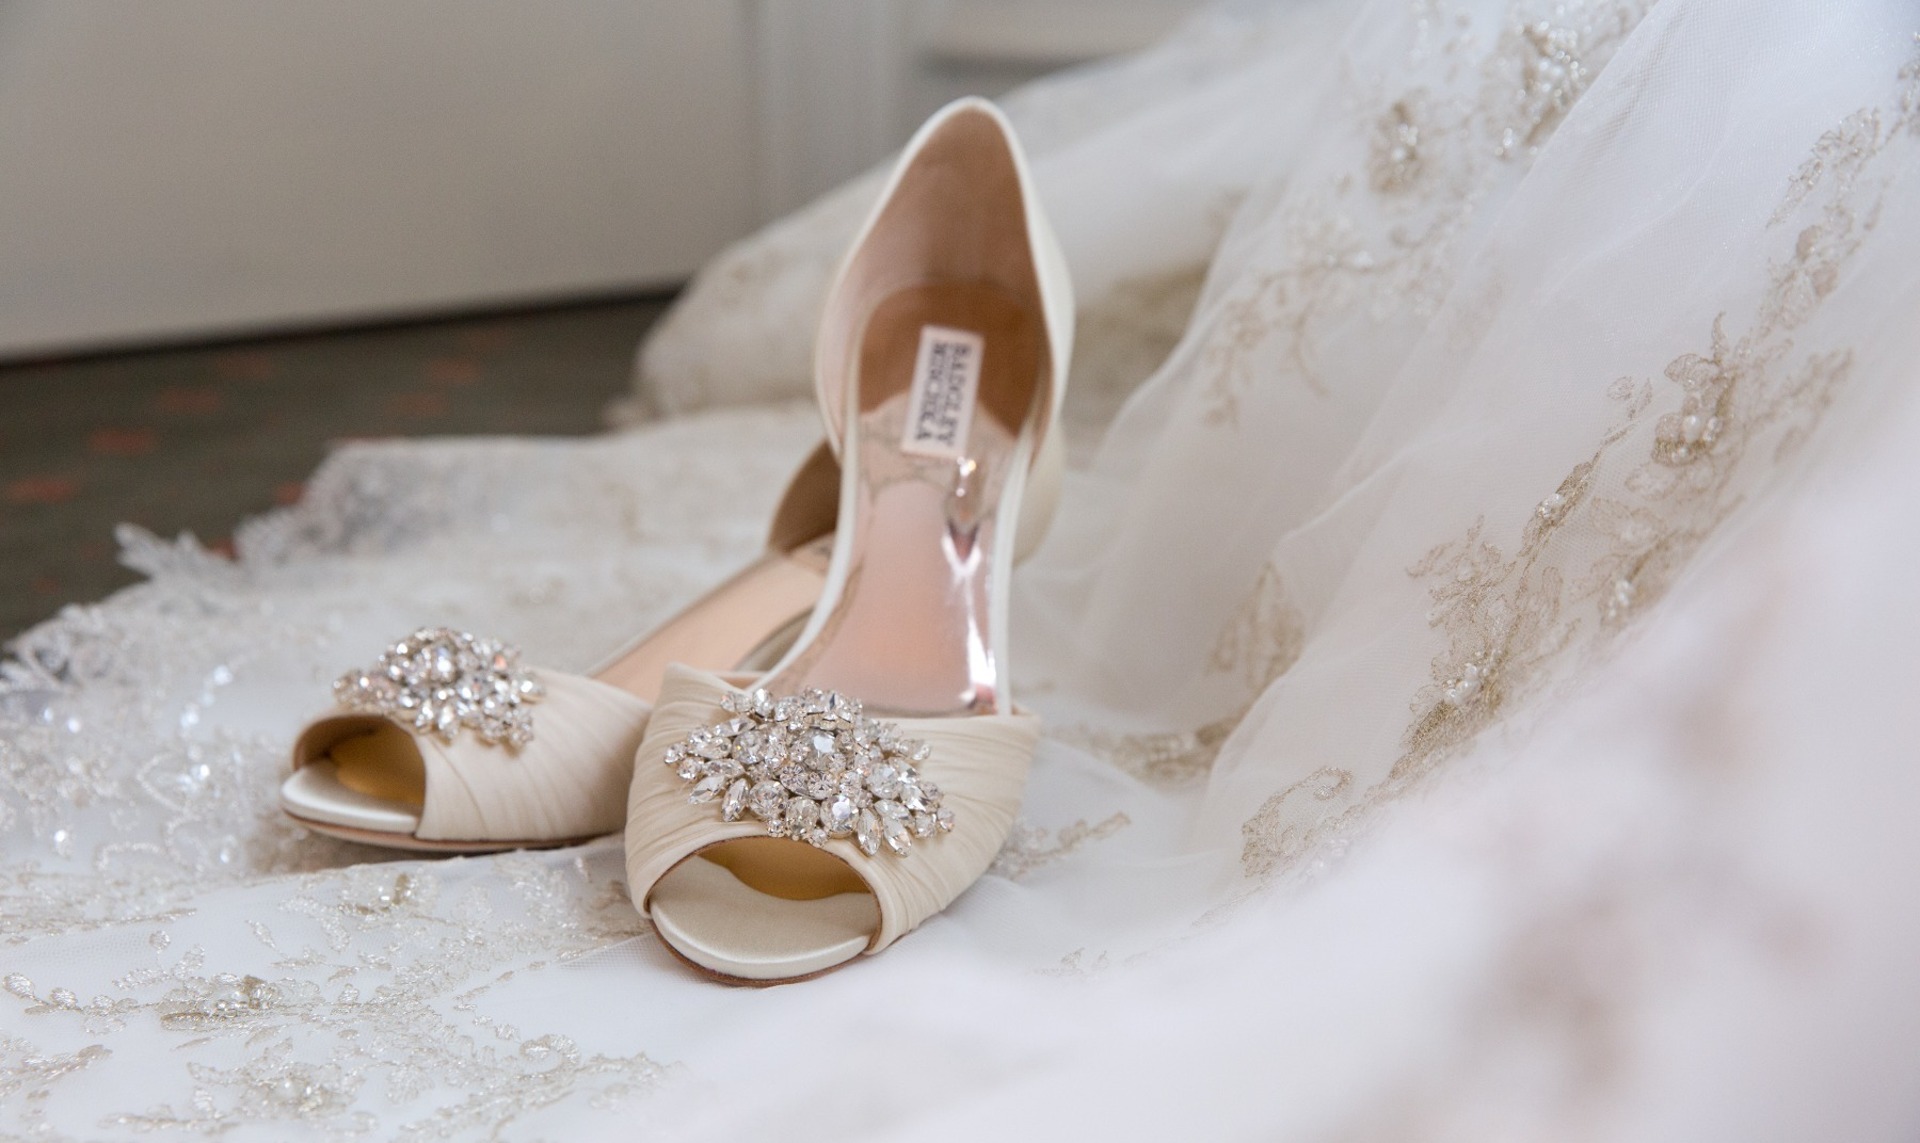 pair of white heels with silver rinestones sit on a white dress